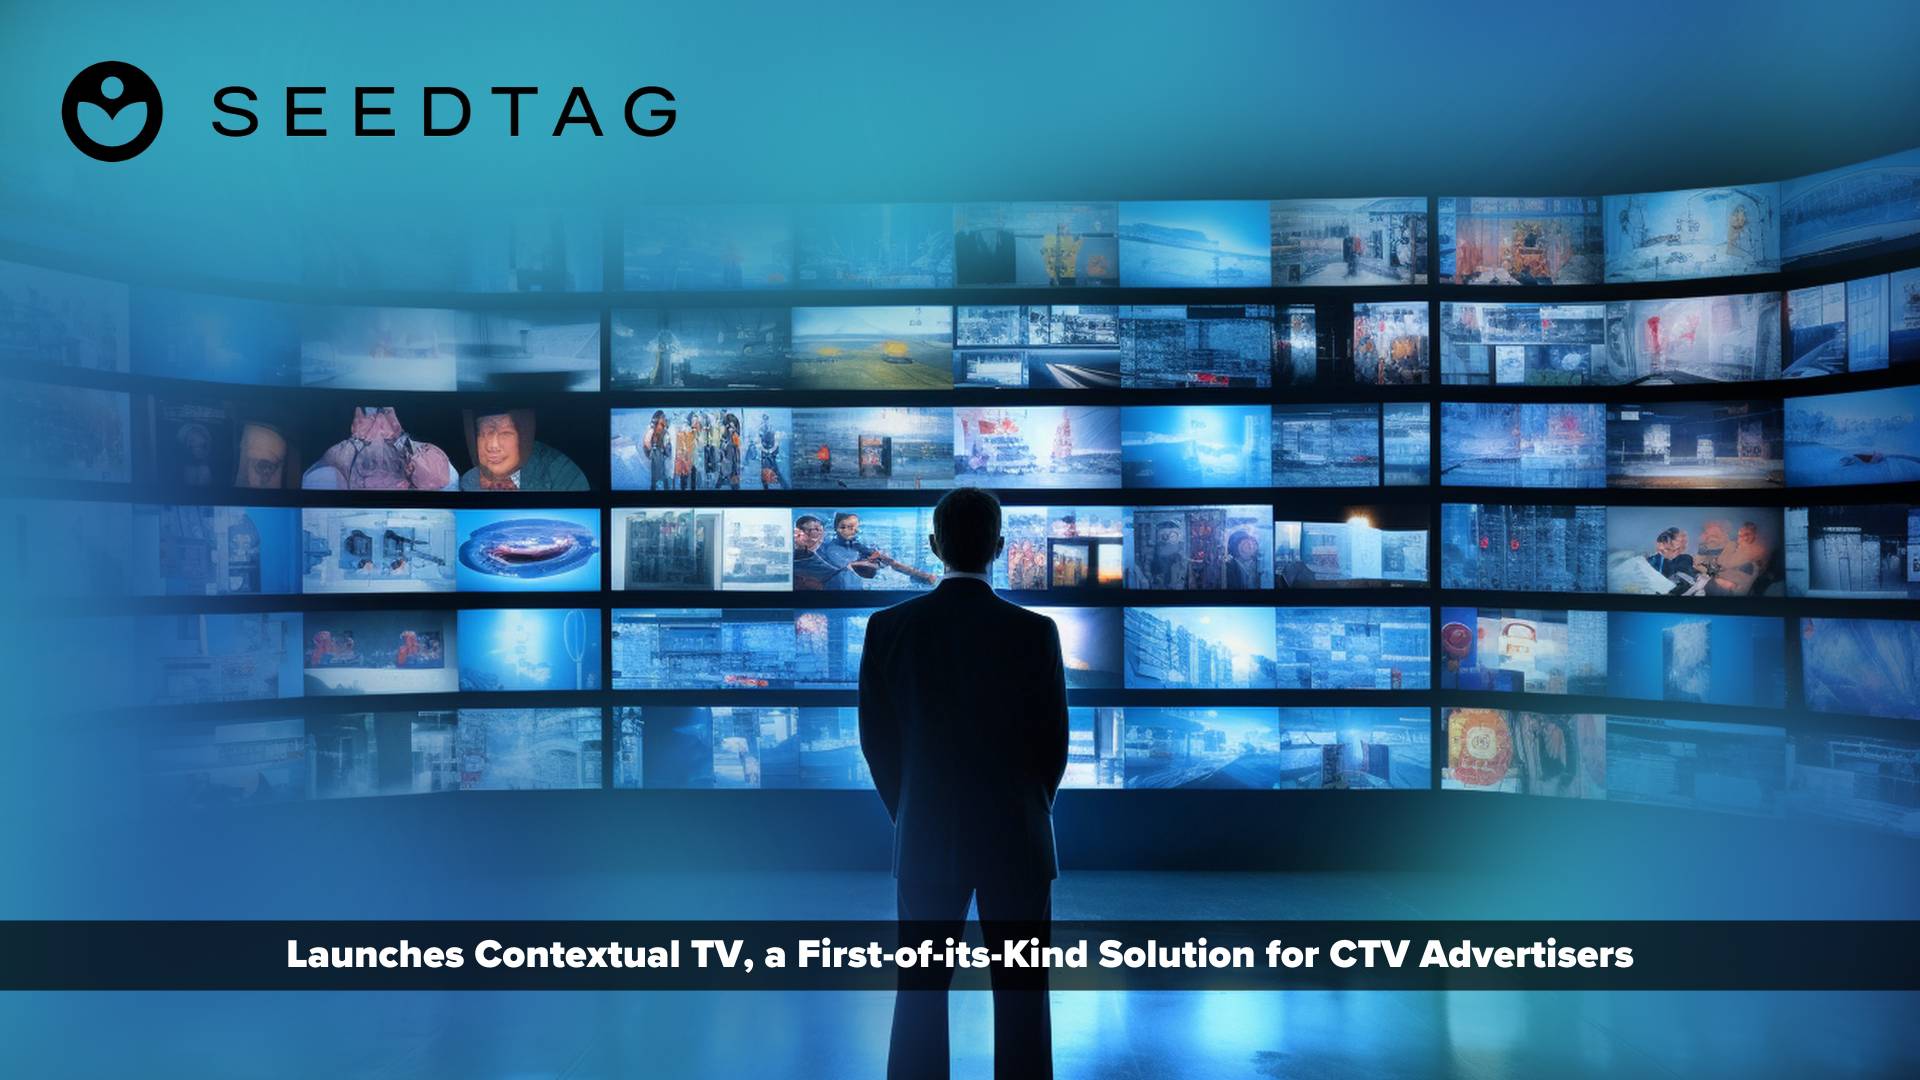 Seedtag Launches Contextual TV, a First-of-its-Kind Solution for CTV Advertisers